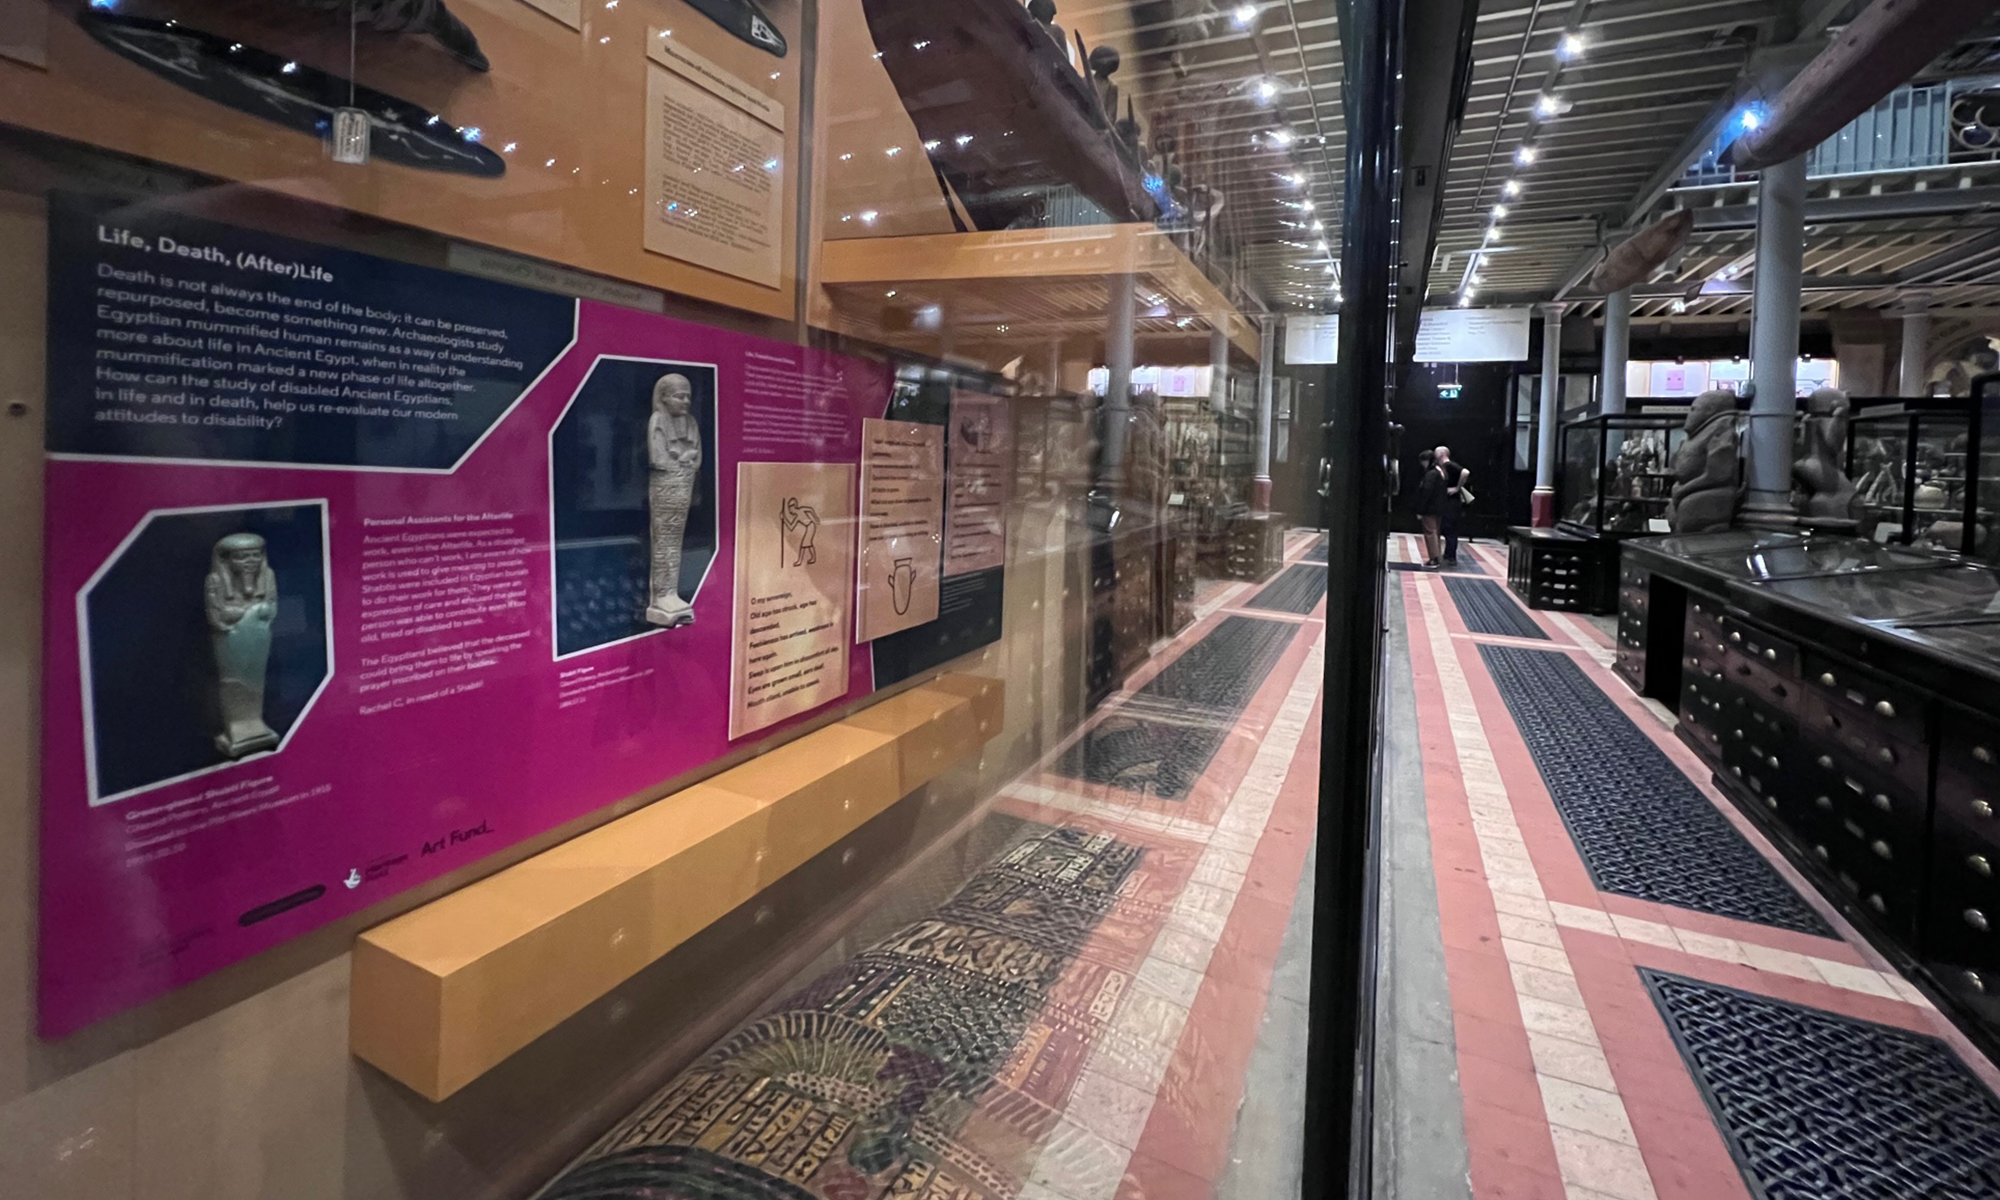 A view of bright pink display graphic in a museum wall case with items from Ancient Egypt